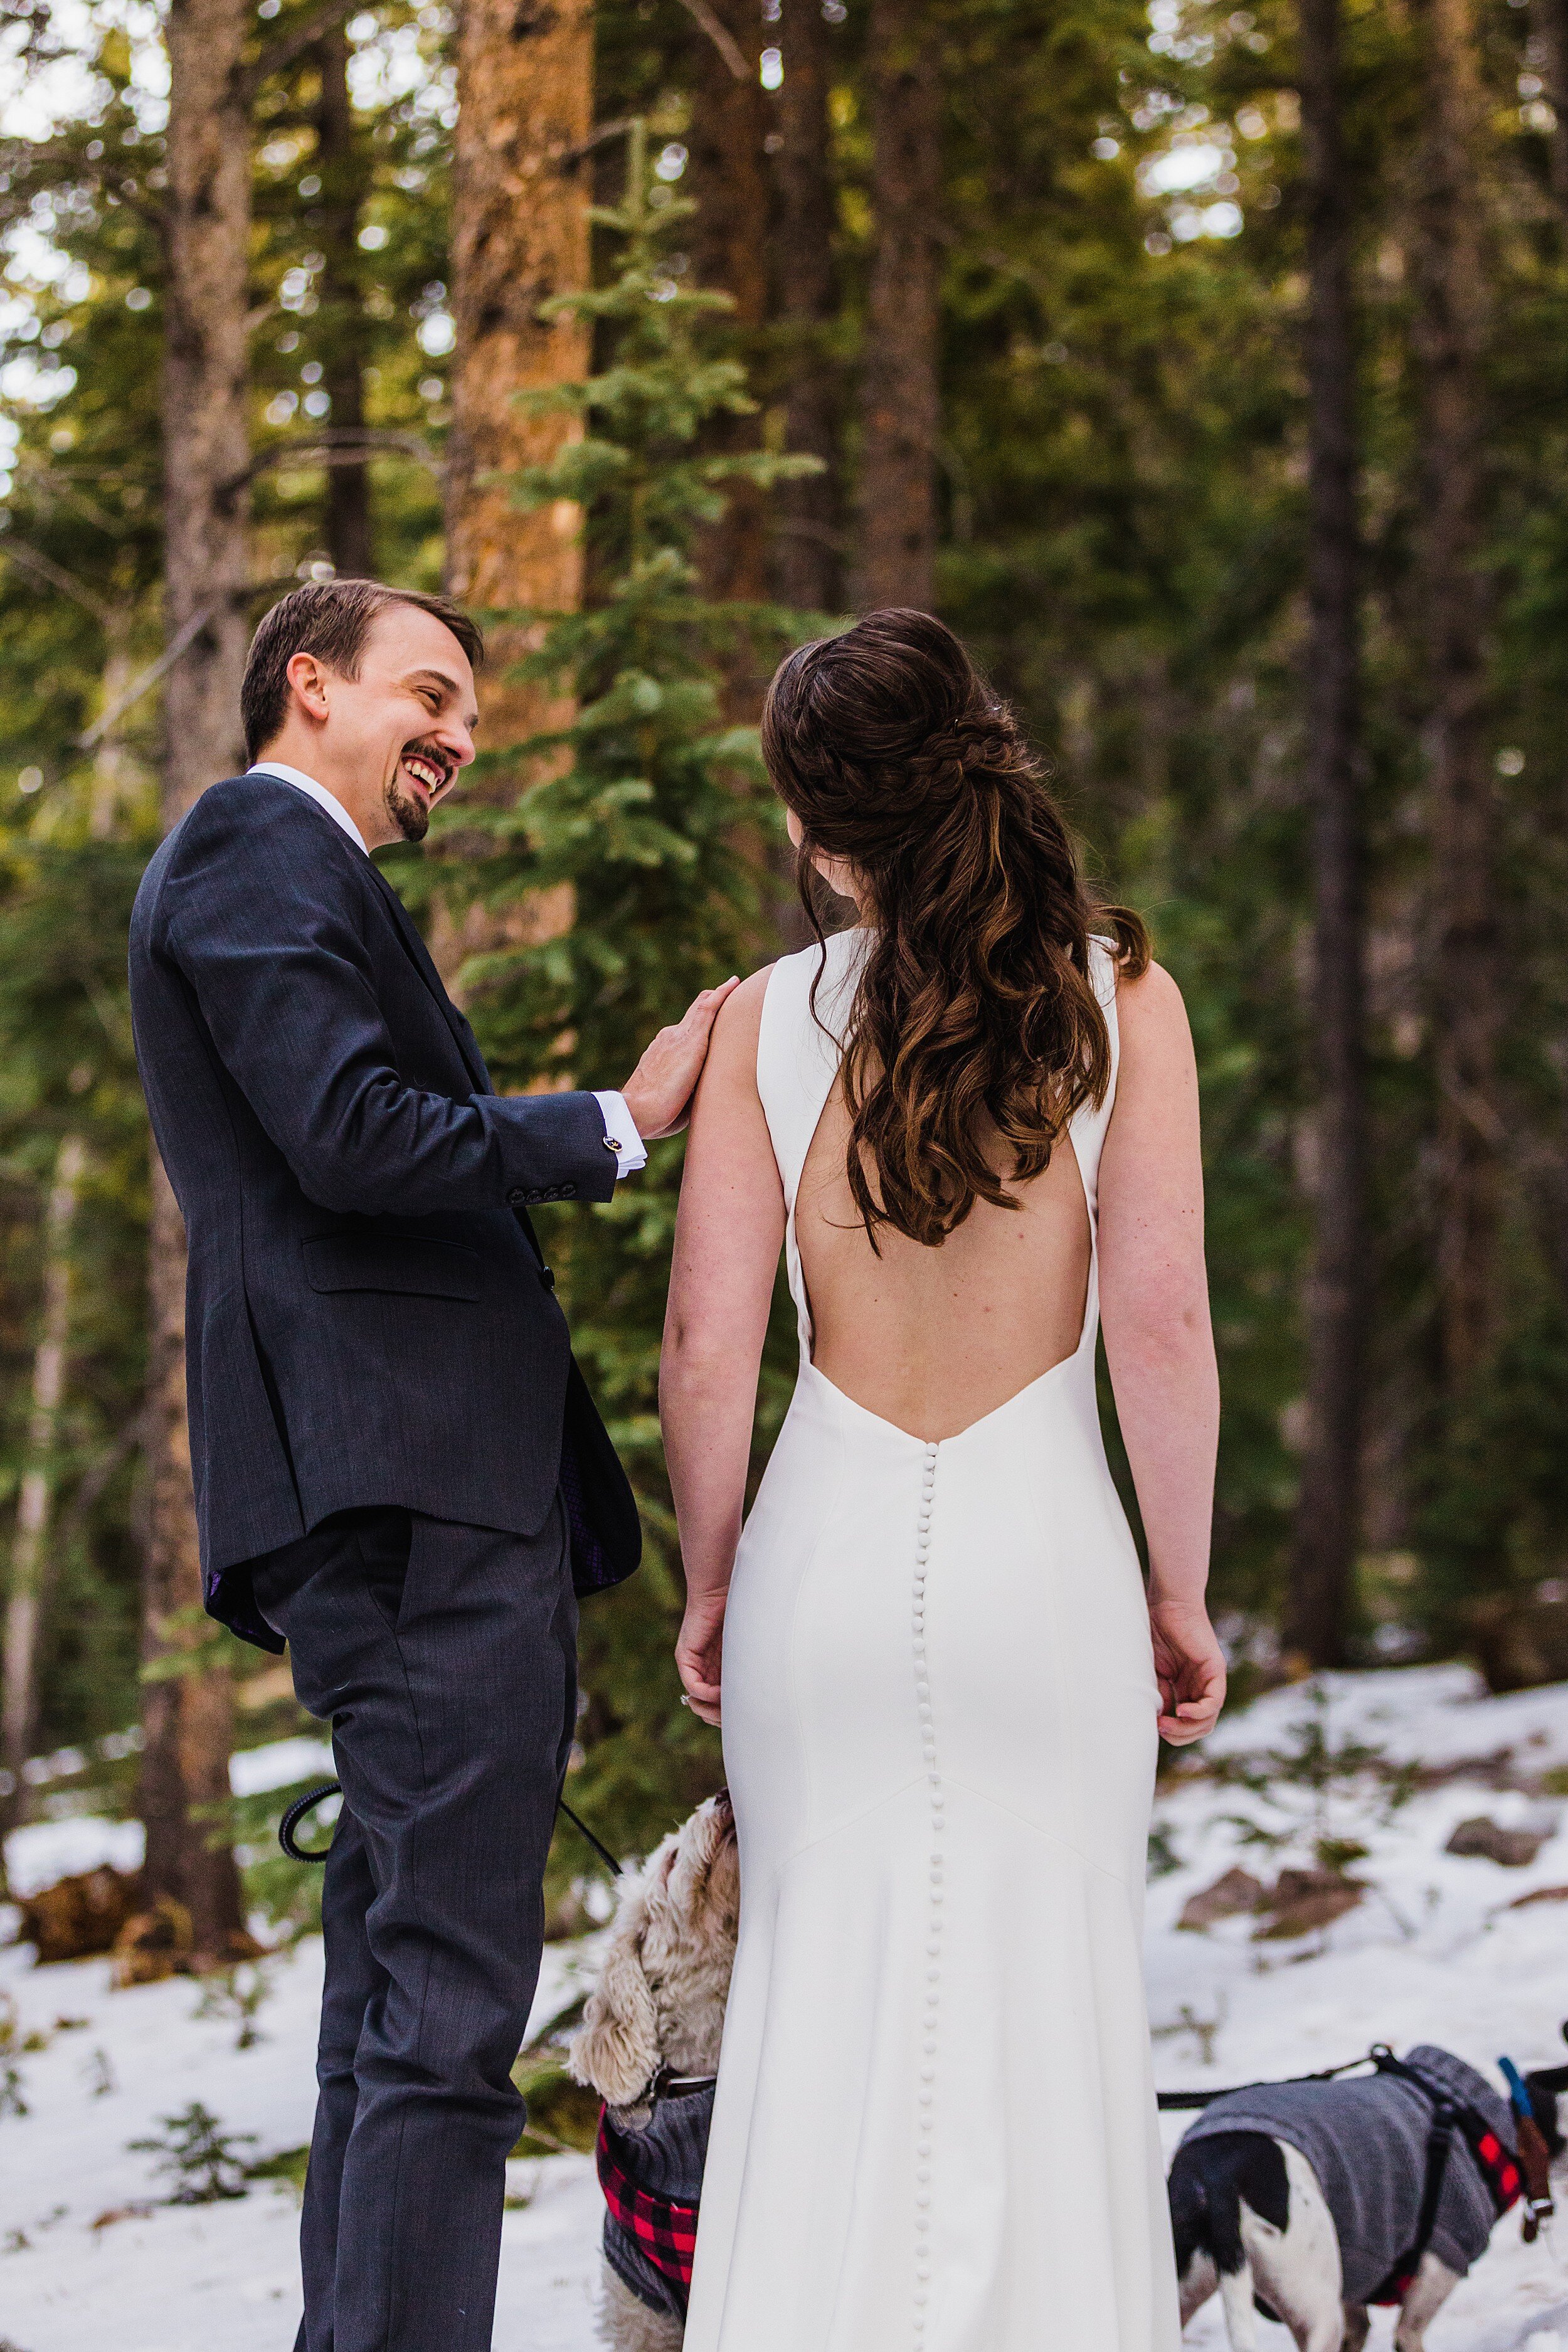 Winter Elopement at The Lodge at Breckenridge | Colorado Elopement Photographer | Vow of the Wild